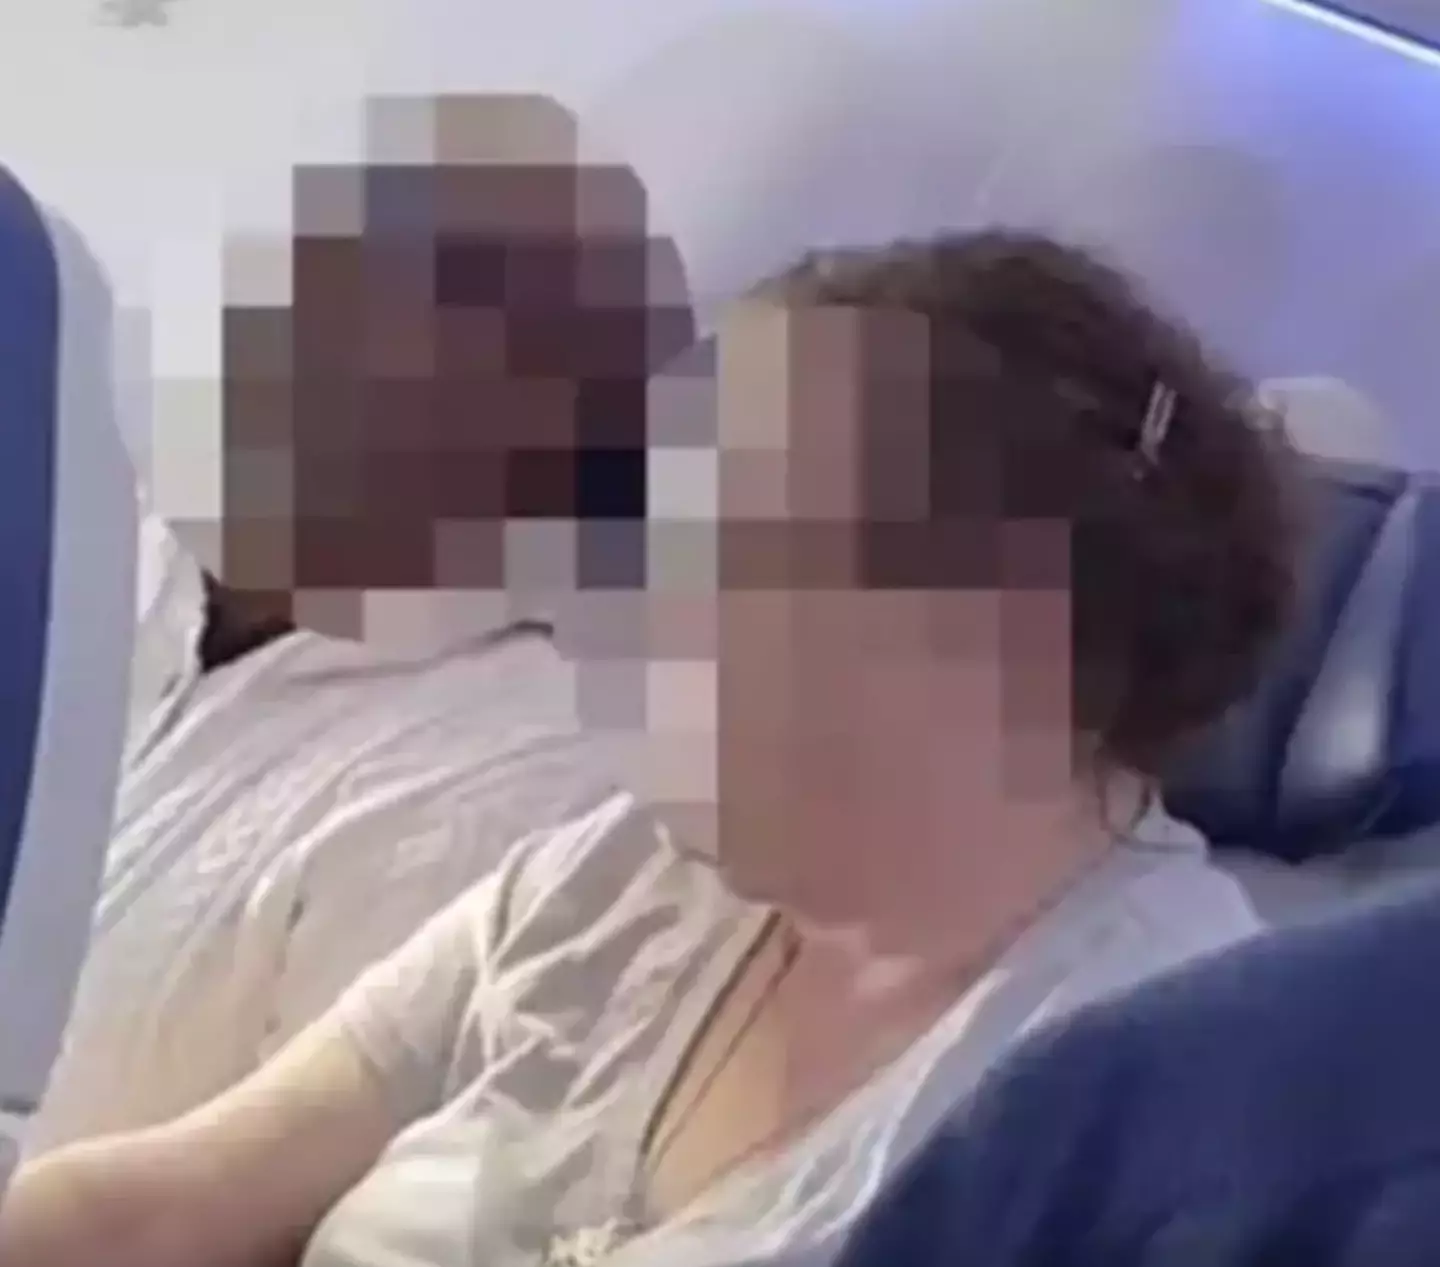 The airplane rant went viral online.